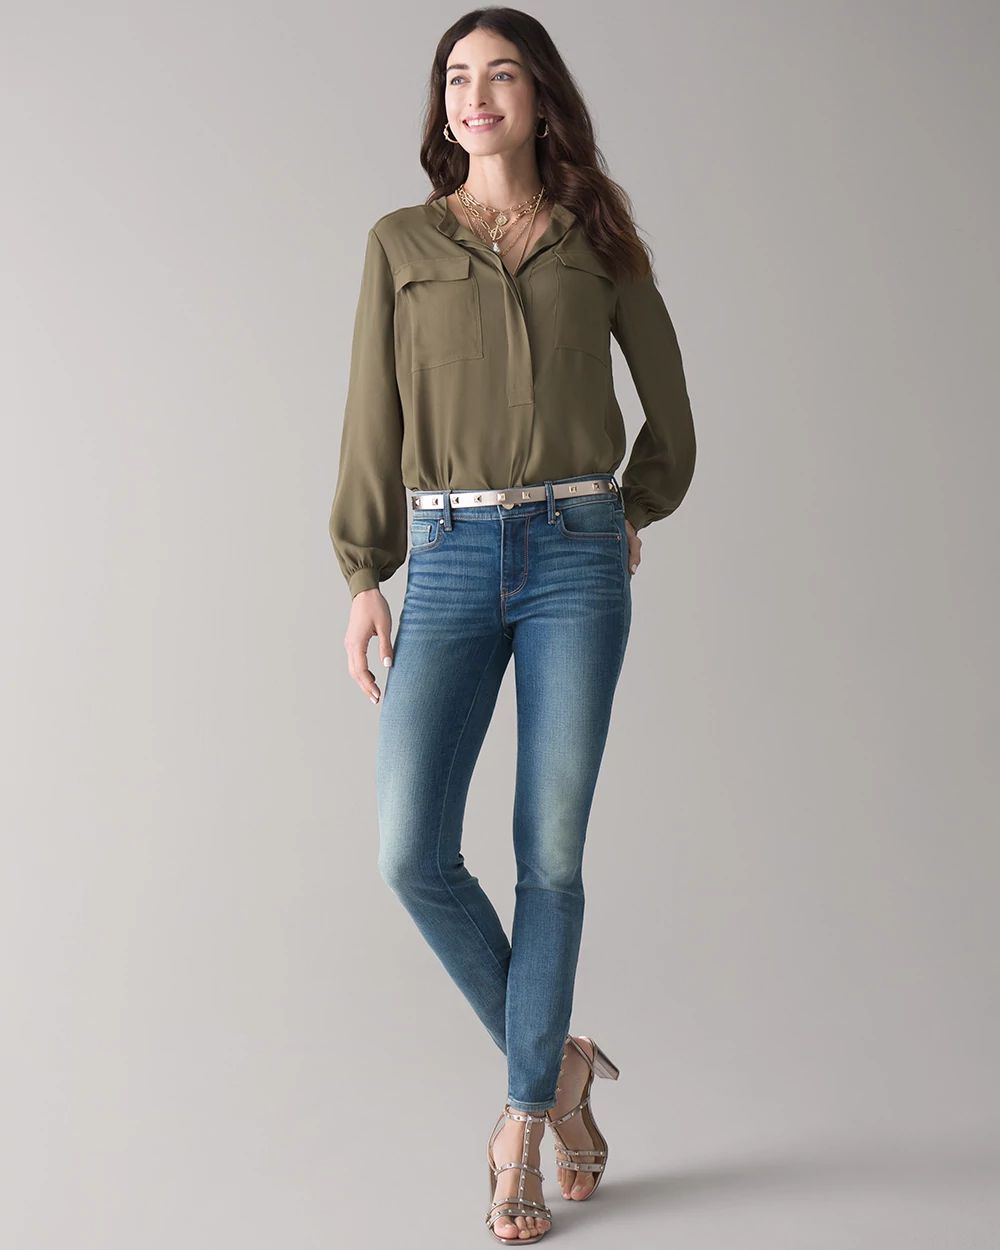 Mid-Rise Everyday Soft Denim™ Button Ankle Skinny Jeans click to view larger image.